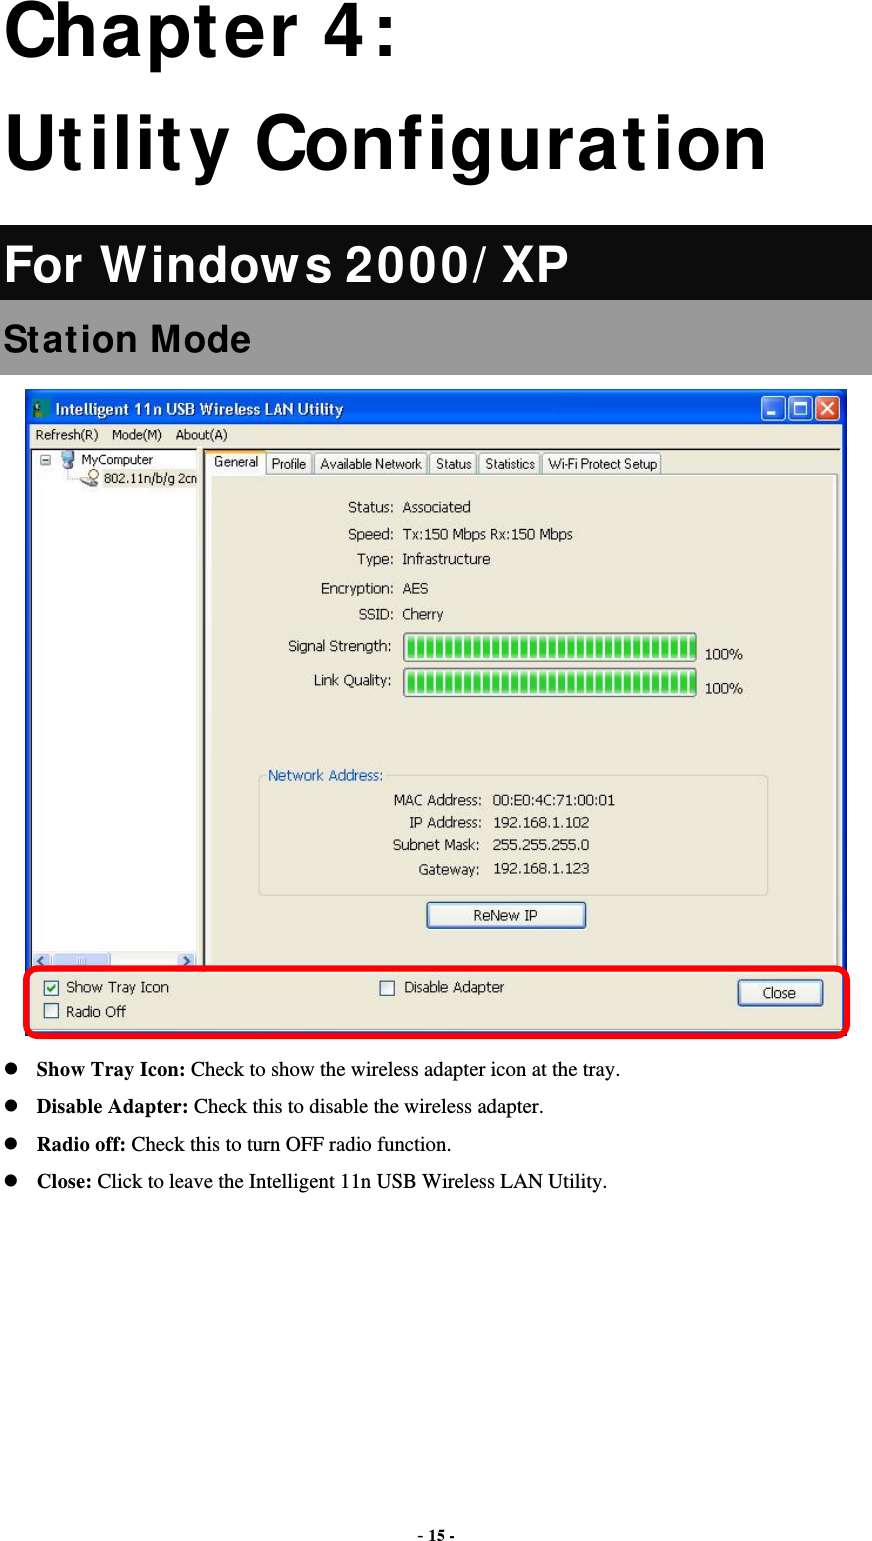  - 15 - Chapter 4: Utility Configuration For Windows 2000/XP Station Mode   Show Tray Icon: Check to show the wireless adapter icon at the tray.  Disable Adapter: Check this to disable the wireless adapter.  Radio off: Check this to turn OFF radio function.  Close: Click to leave the Intelligent 11n USB Wireless LAN Utility.       